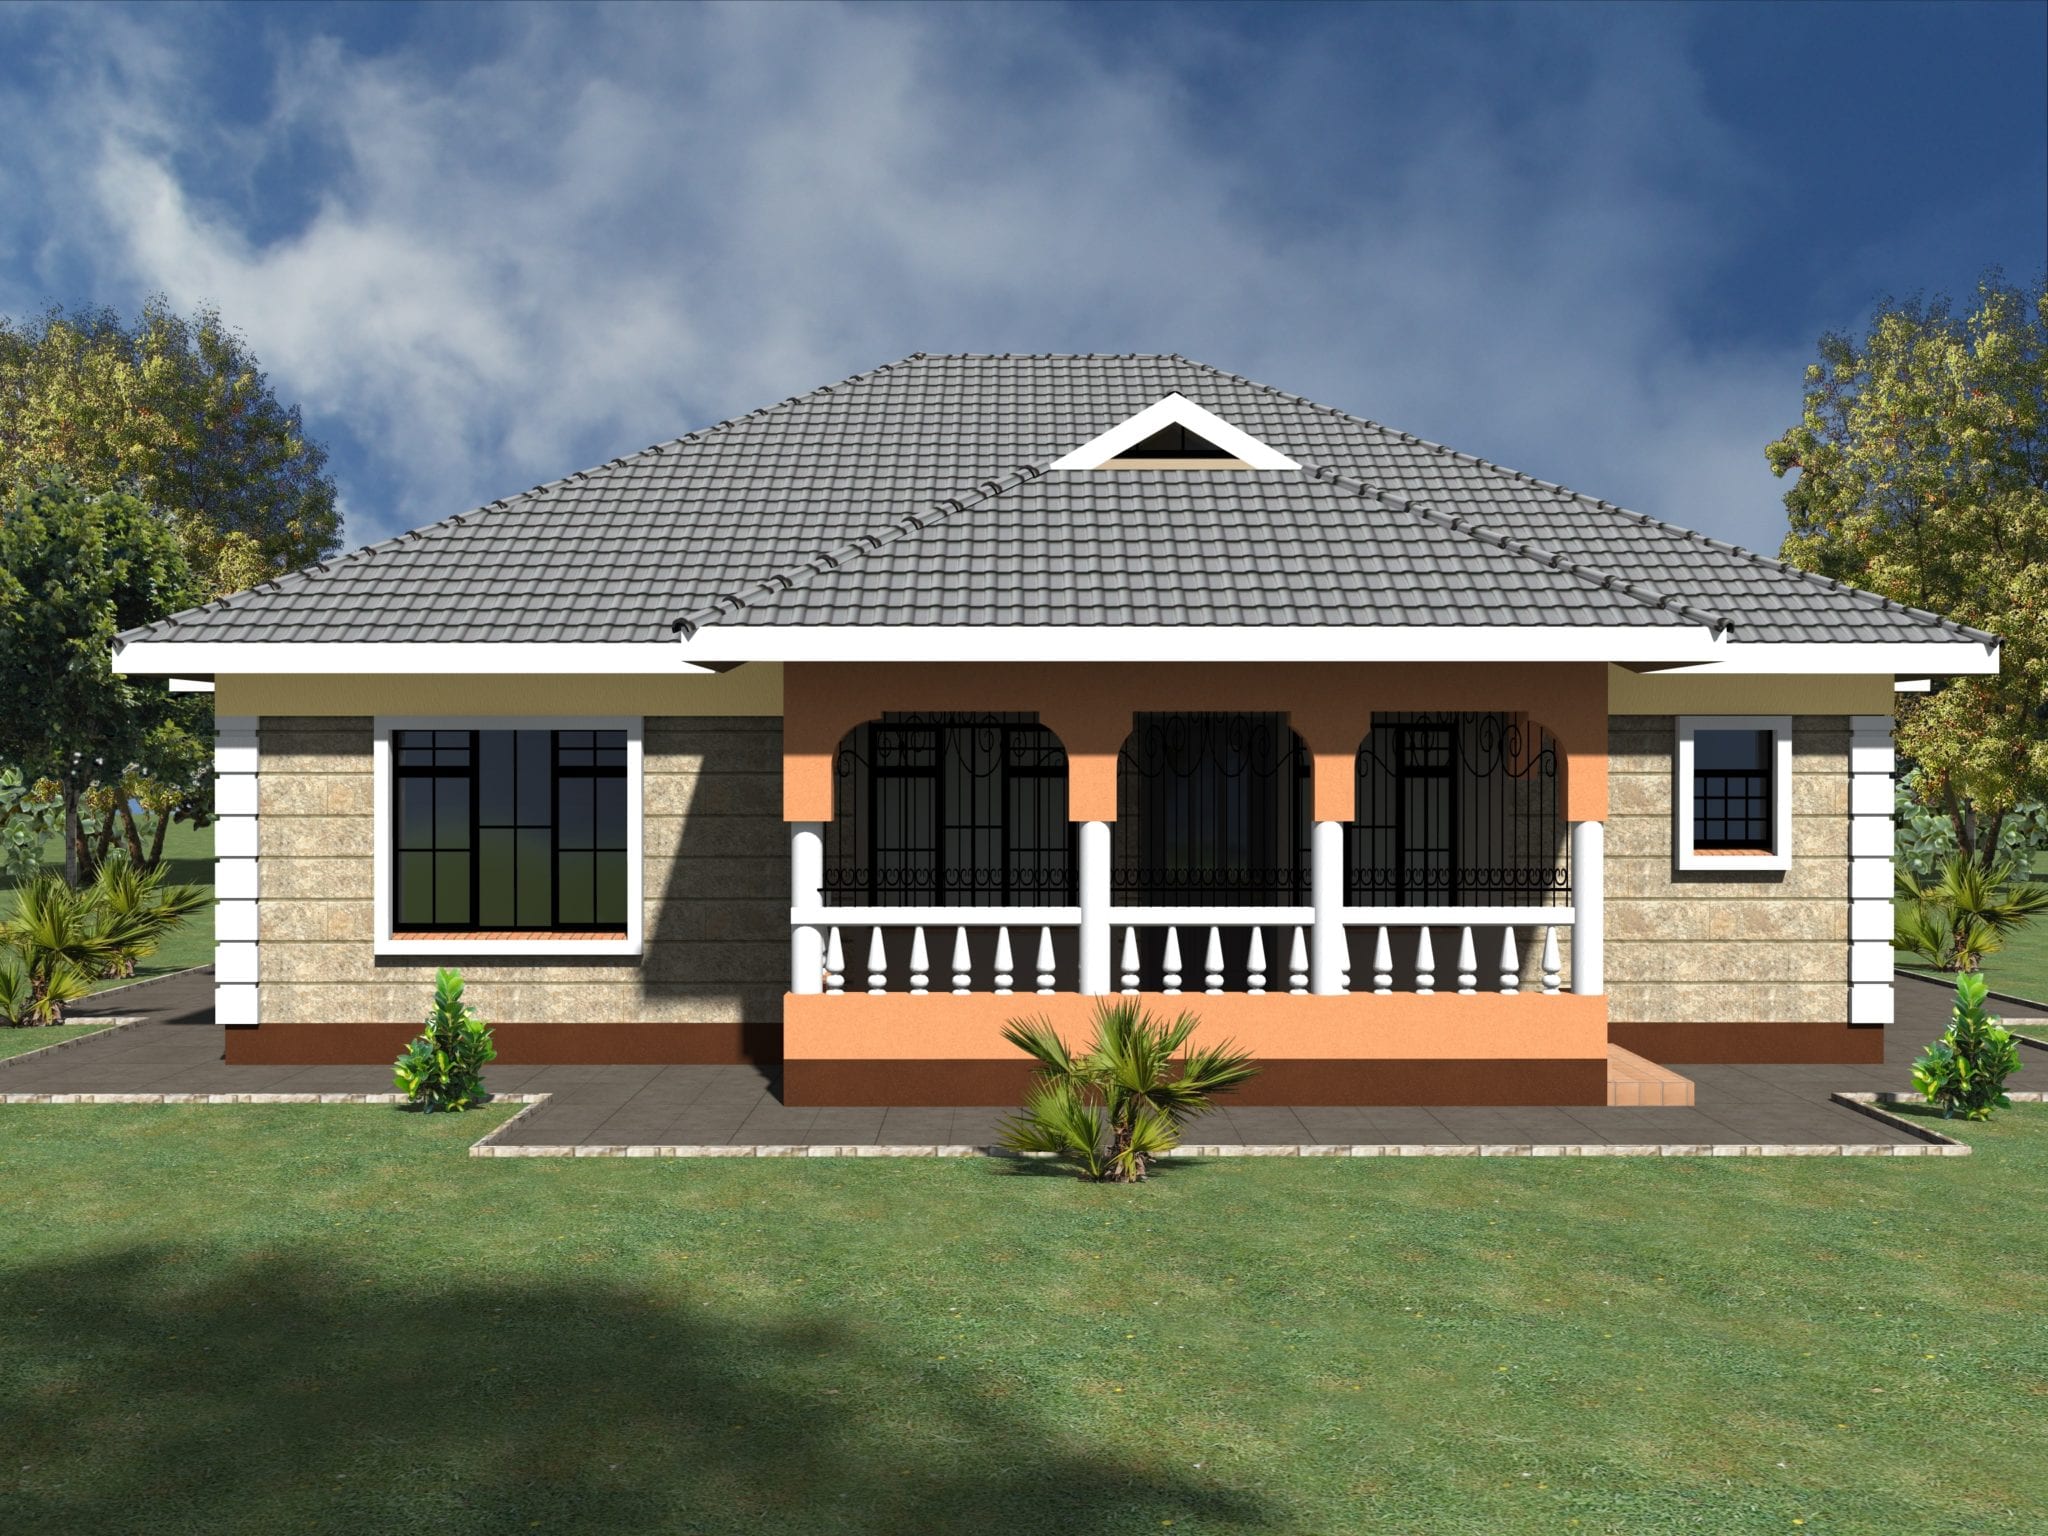 Simple 3  bedroom  house  plans  without garage HPD Consult